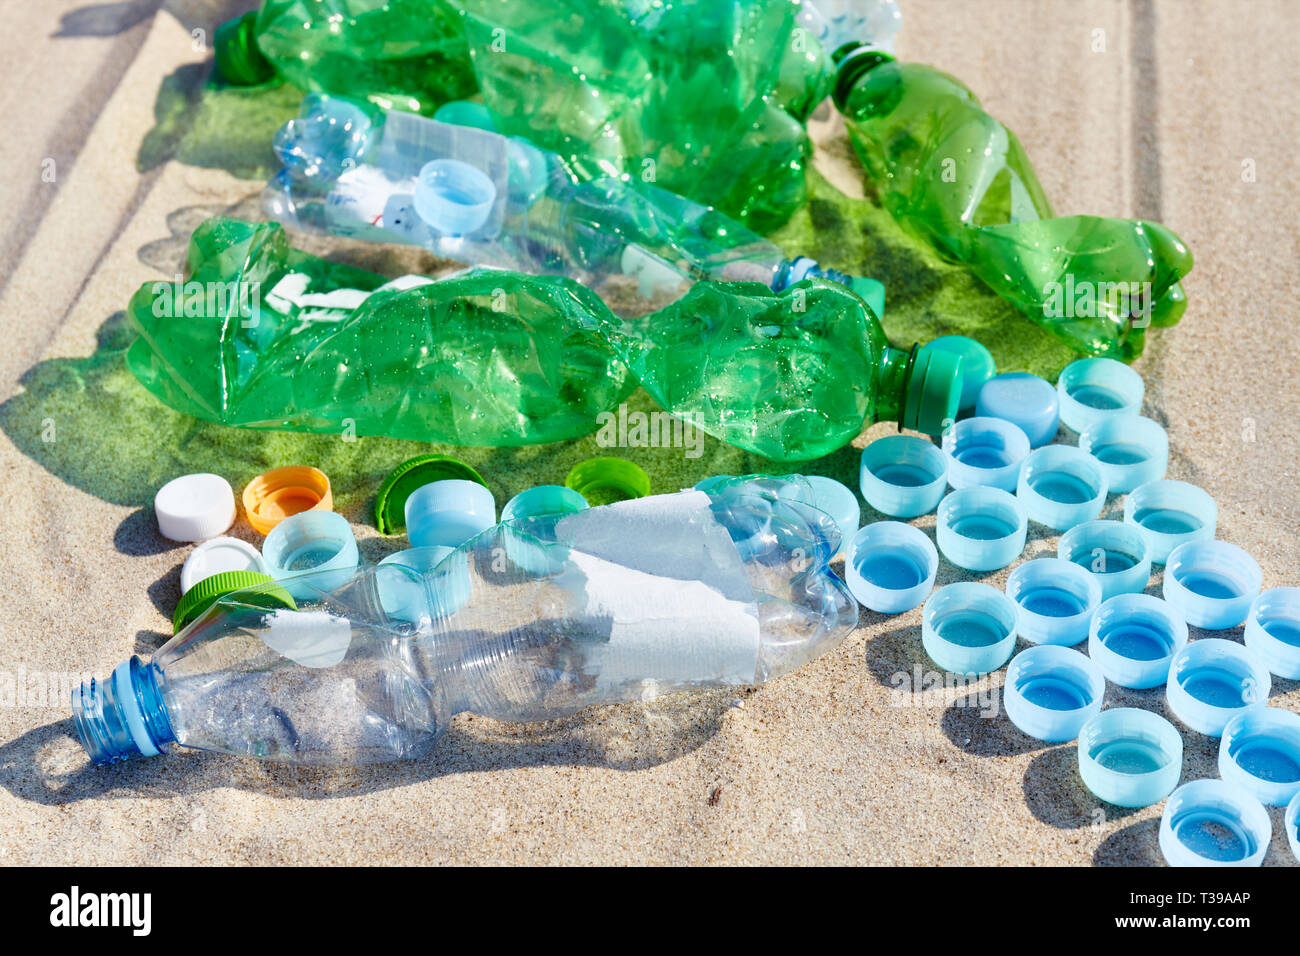 Close up picture of used plastic bottles and caps on a beach, selective focus. Stock Photo